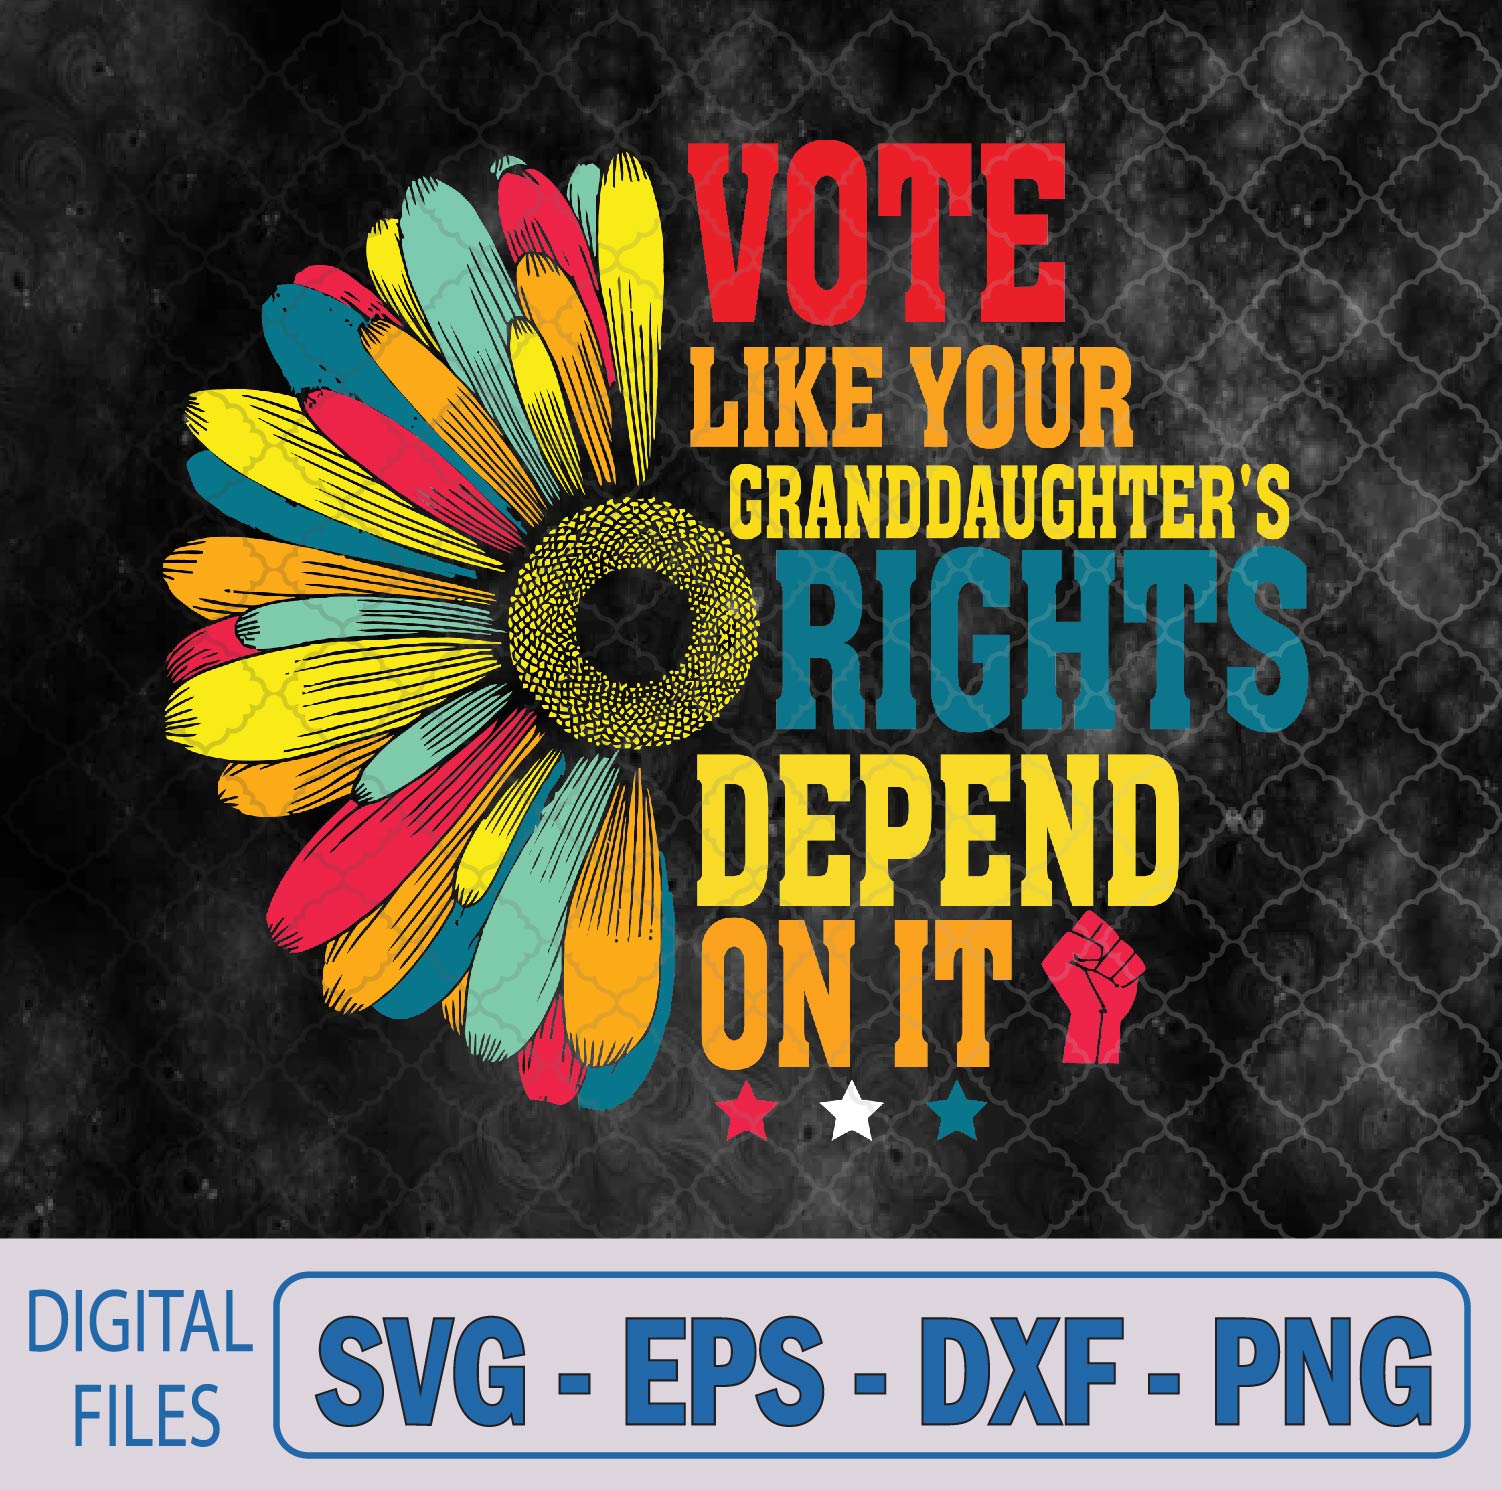 WTMNEW9file 09 255 Vote Like Your Daughters Granddaughters Rights Depend On It Svg, Png, Digital Download